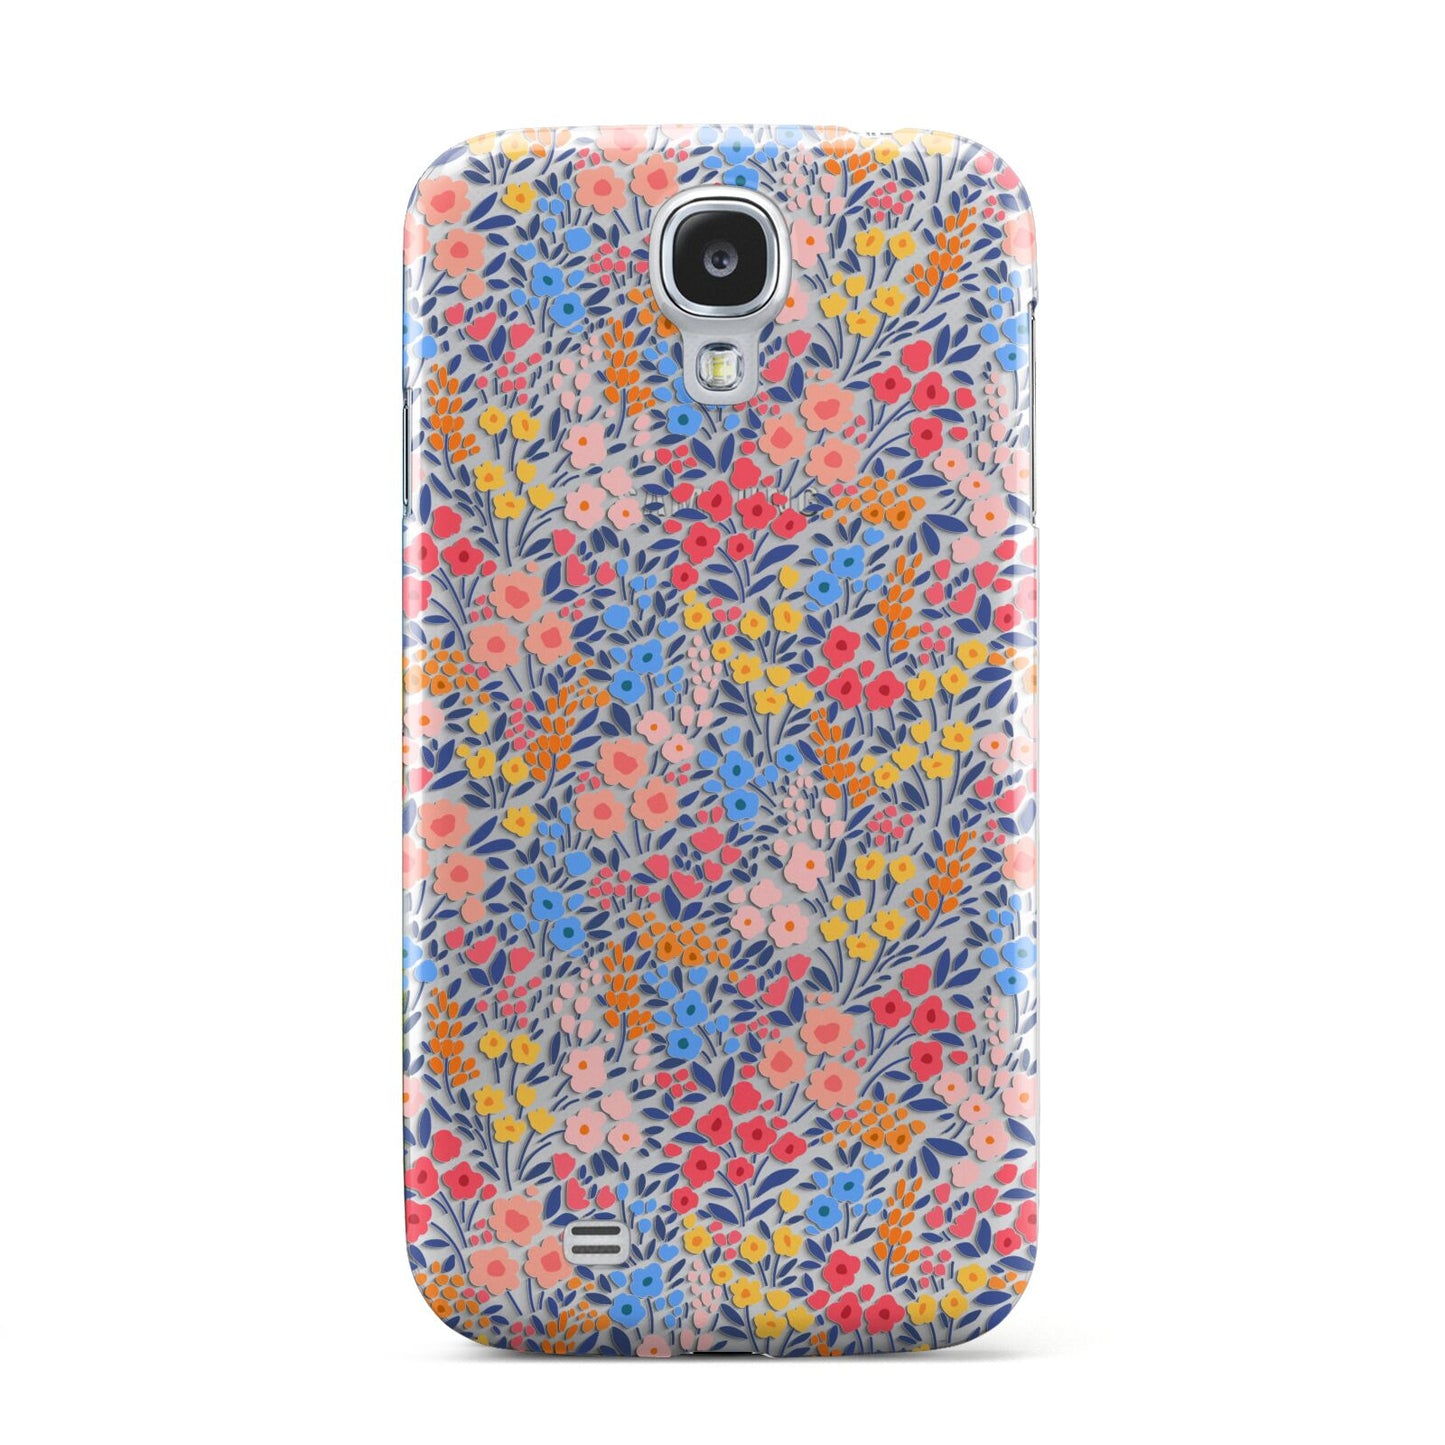 Small Flowers Samsung Galaxy S4 Case